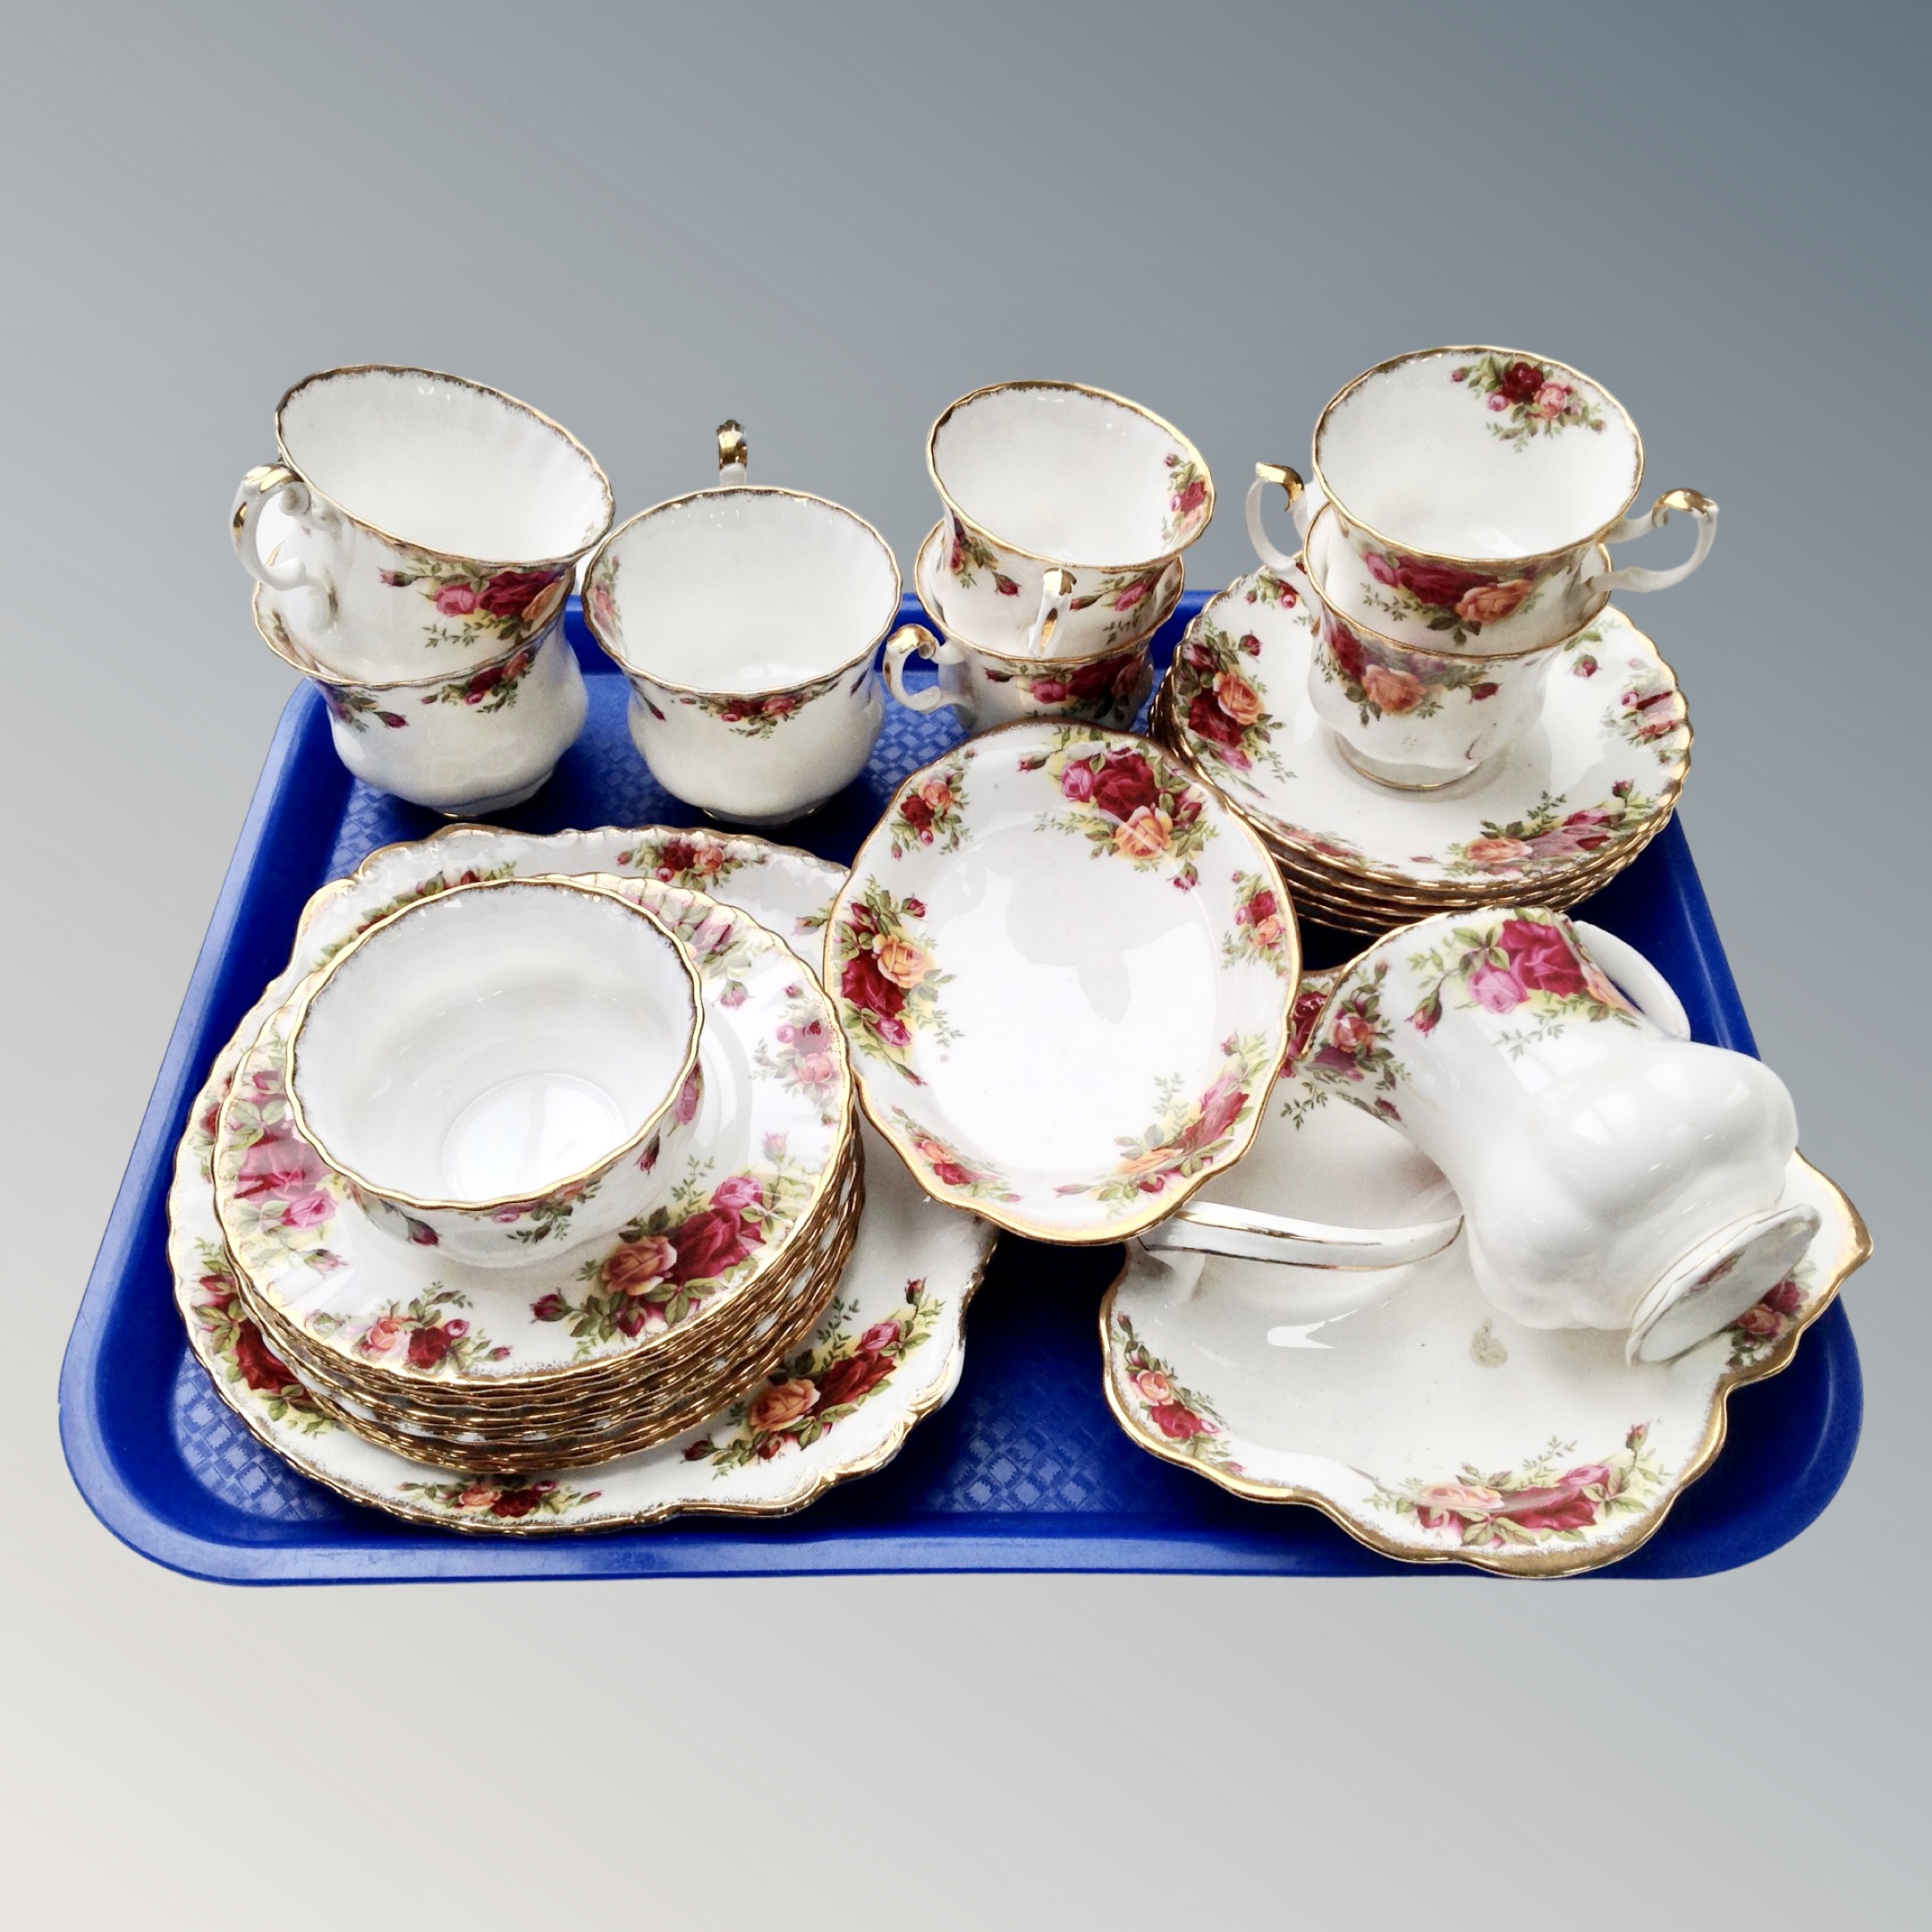 A tray containing a Royal Albert Old Country Roses part tea set.